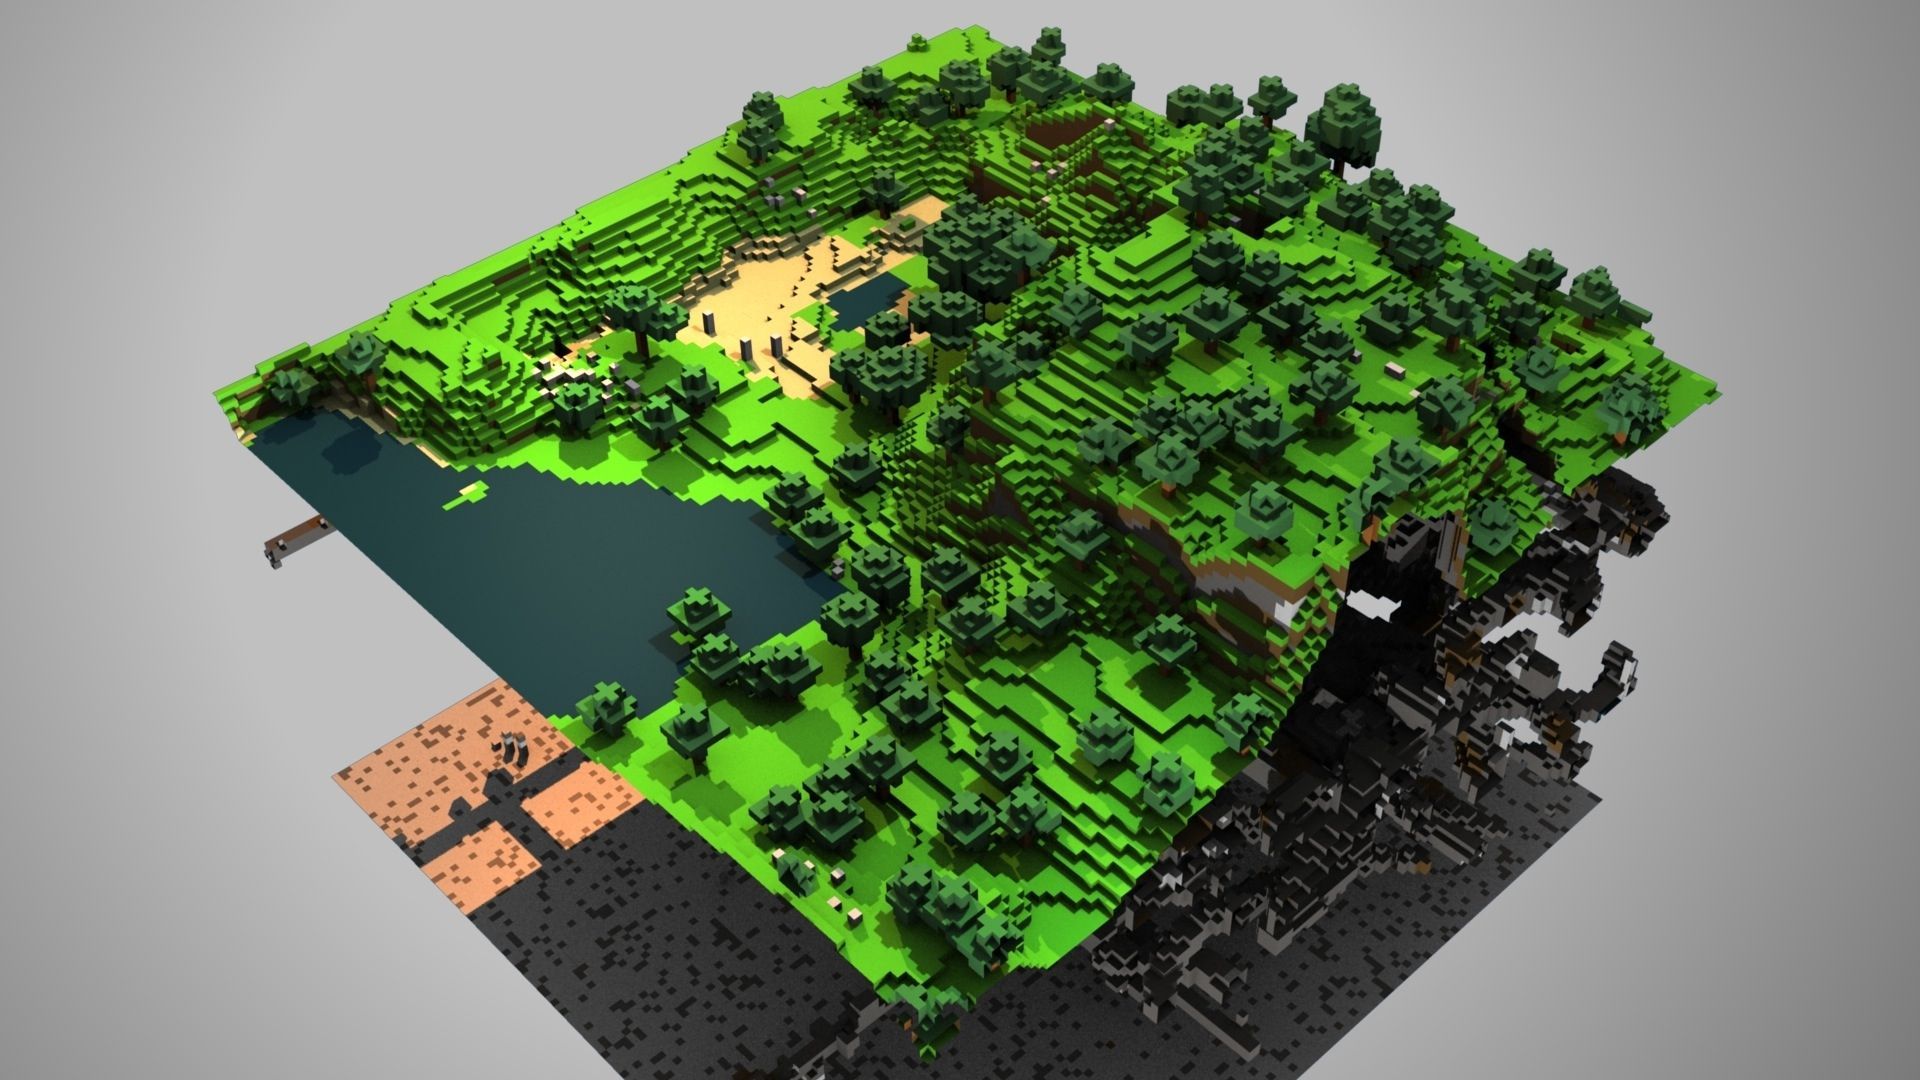 Adorable Minecraft Ground Trees Lake Wallpaper « Kuff Games